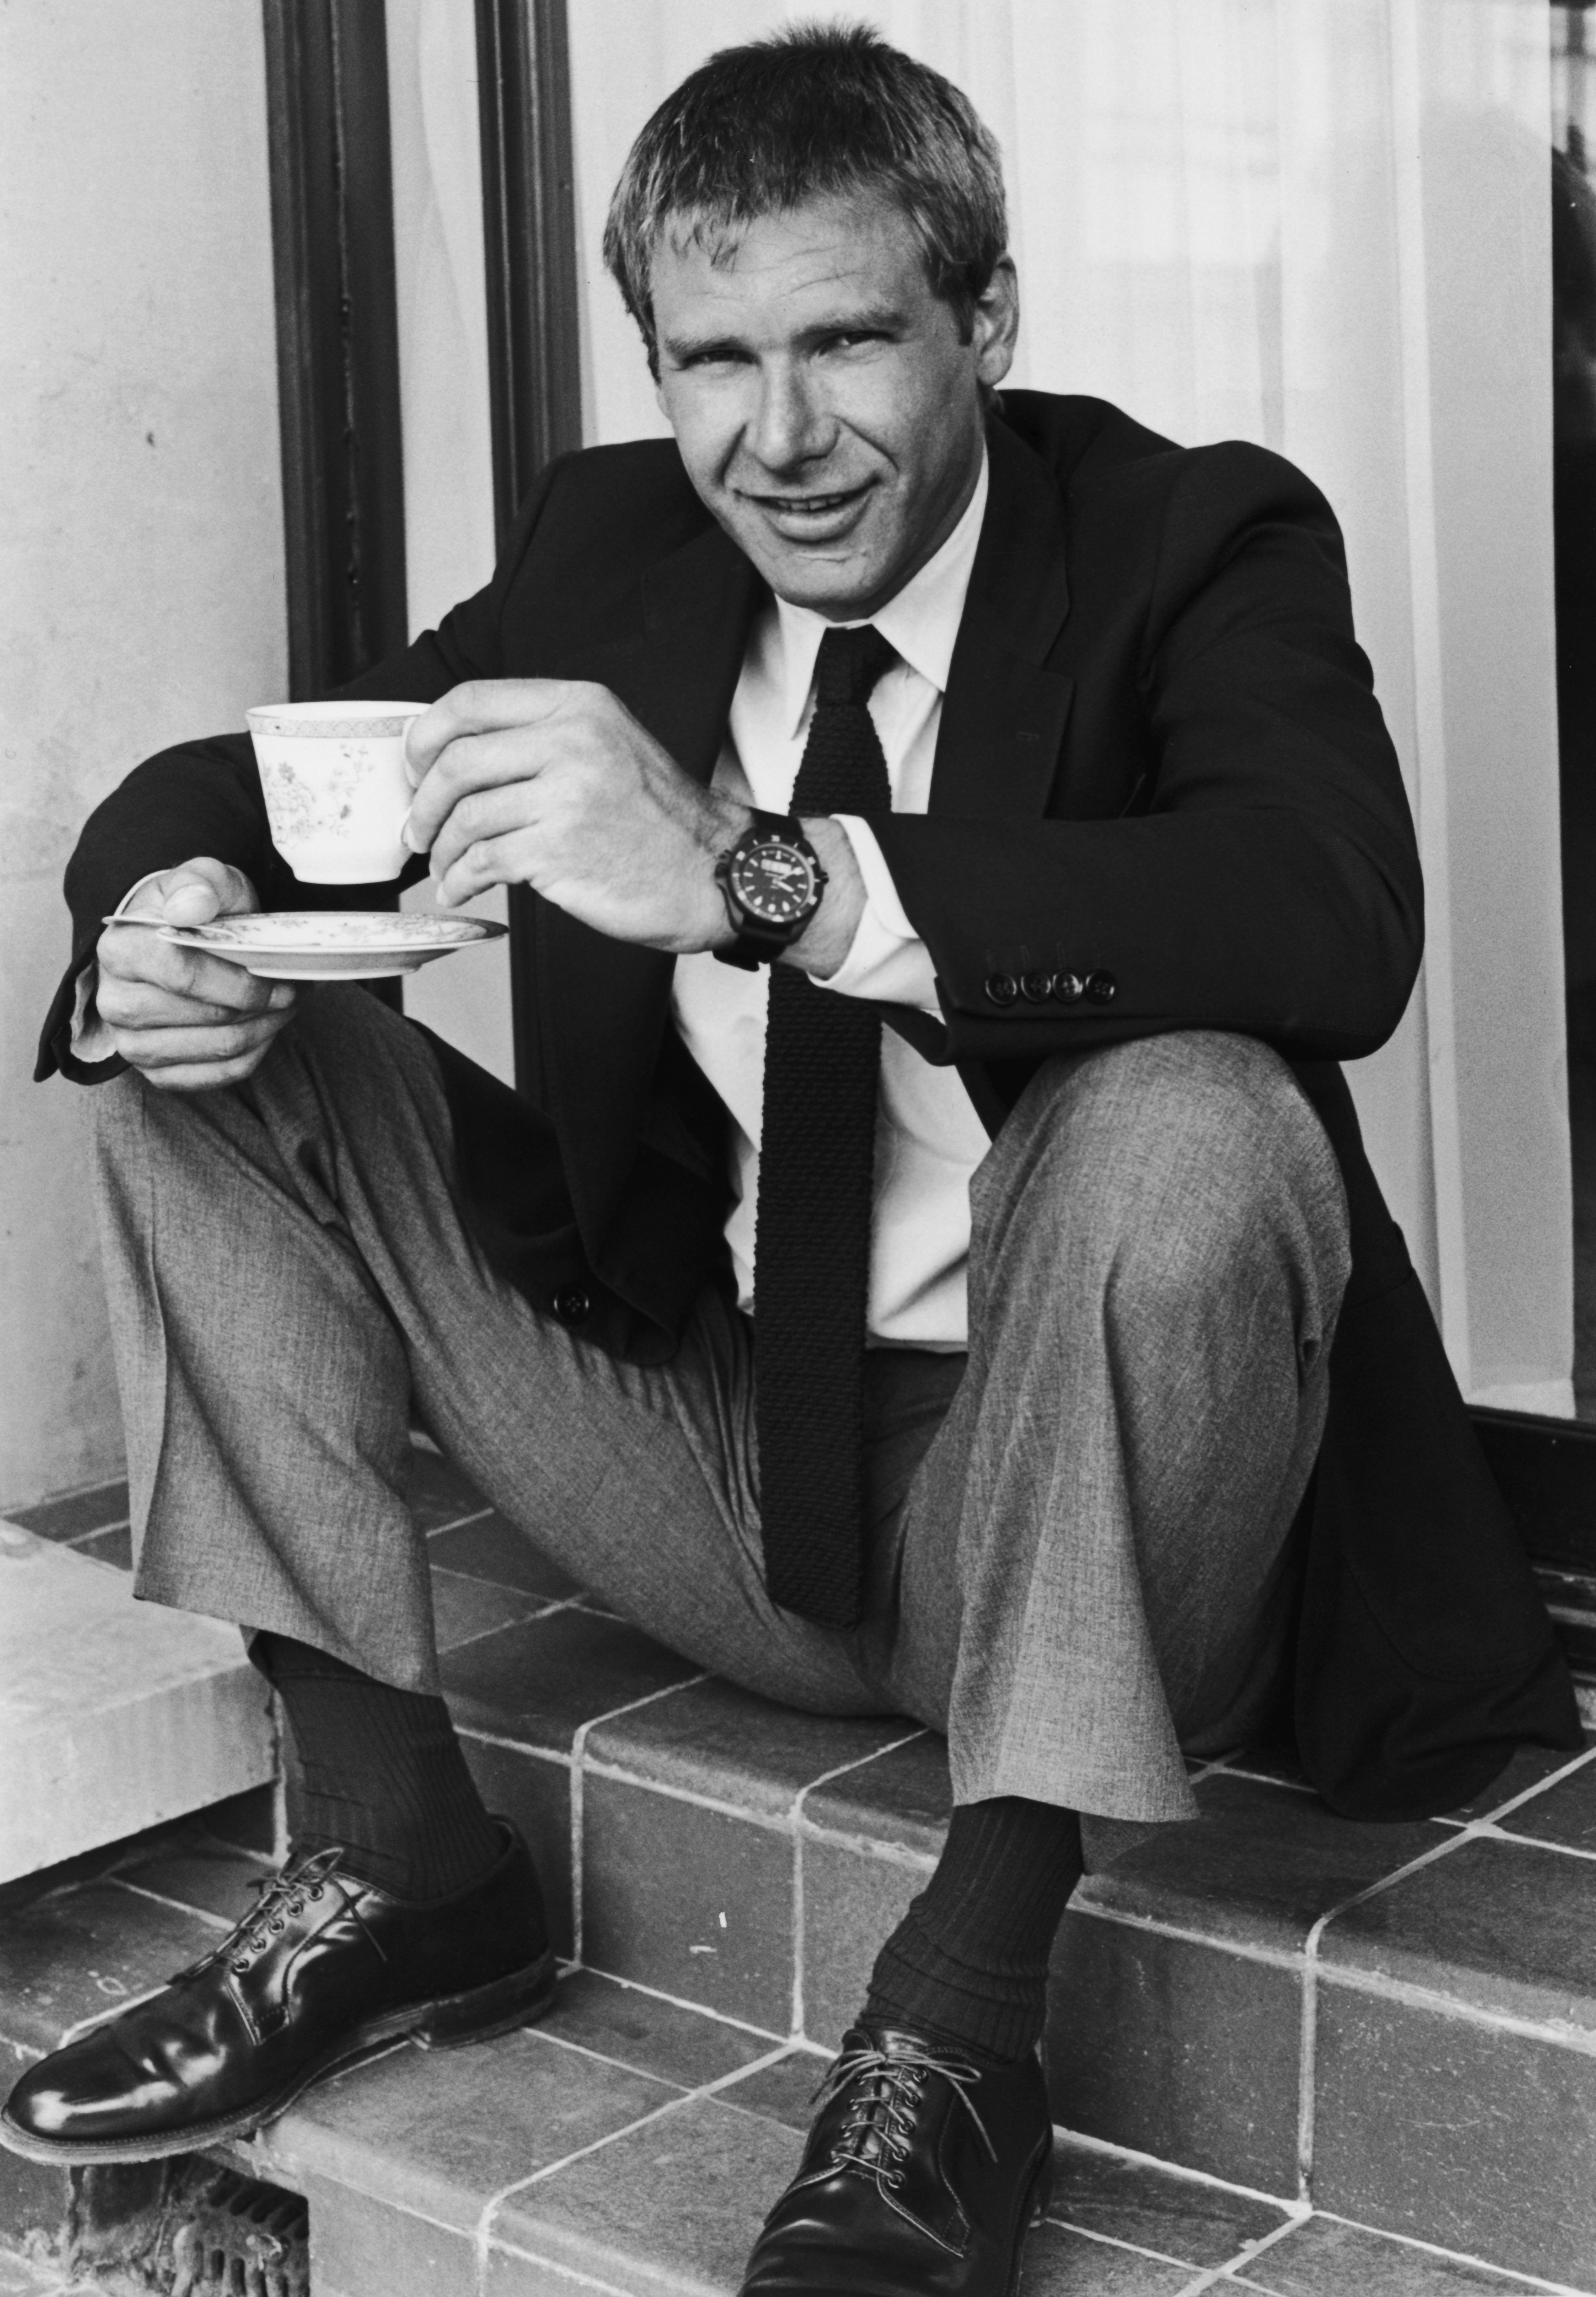 Harrison Ford sitting on steps, smiling while holding a teacup and saucer in circa 1984. | Source: Hulton Archive/Getty Images